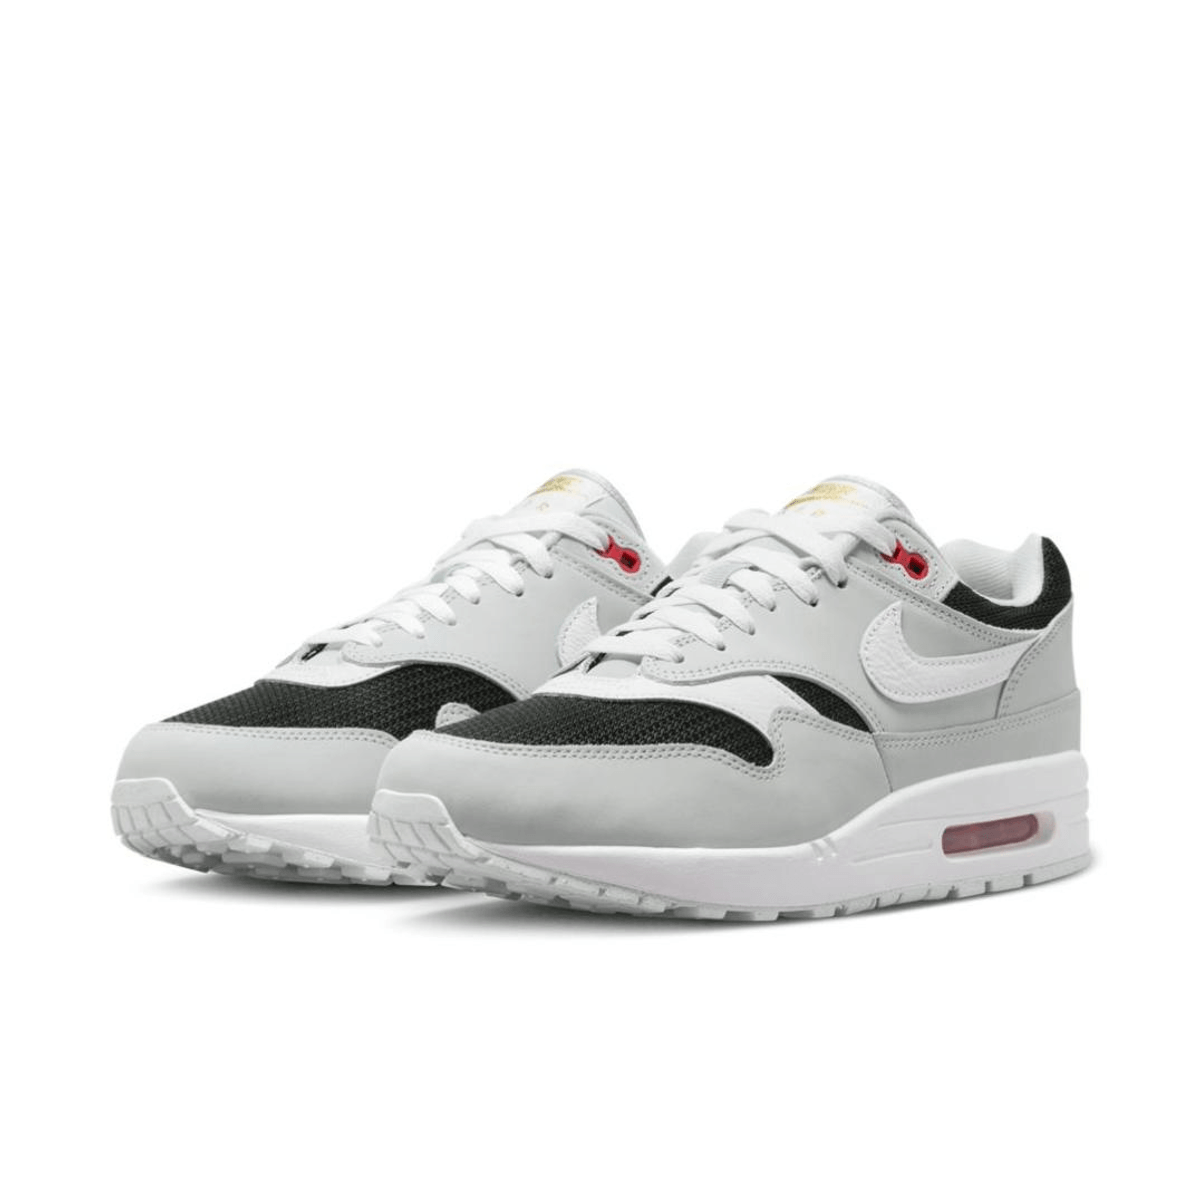 Nike Air Max 1 Urawa Is a Reiteration Of The 2004 Model